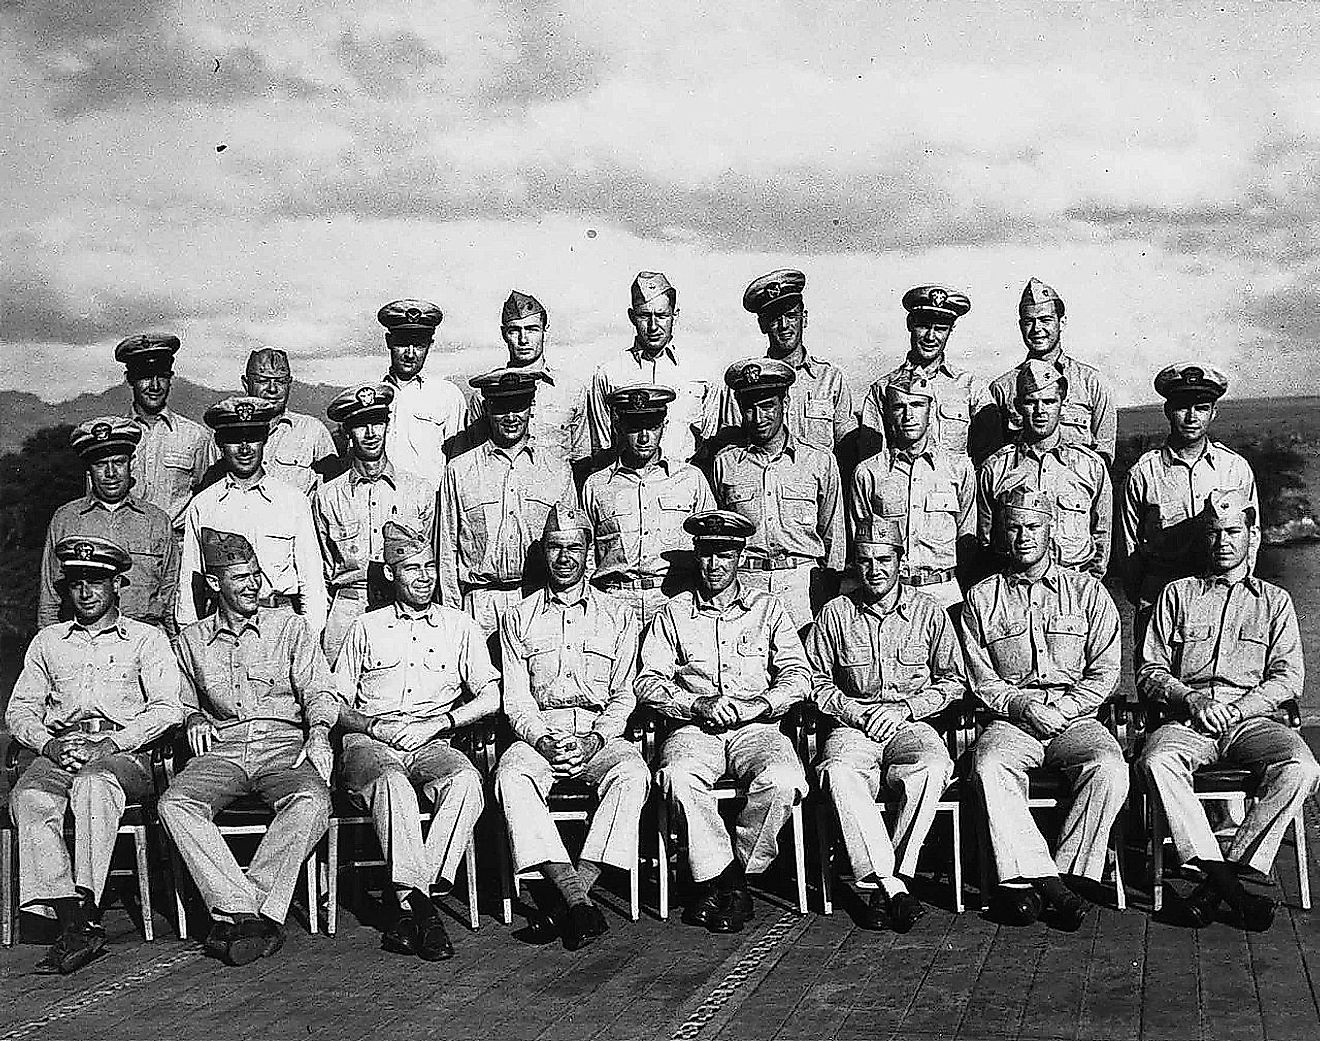 The Gunnery officers of USS Monterey. Ford is second from the right, in the front row. Image credit: US Navy / Public domain